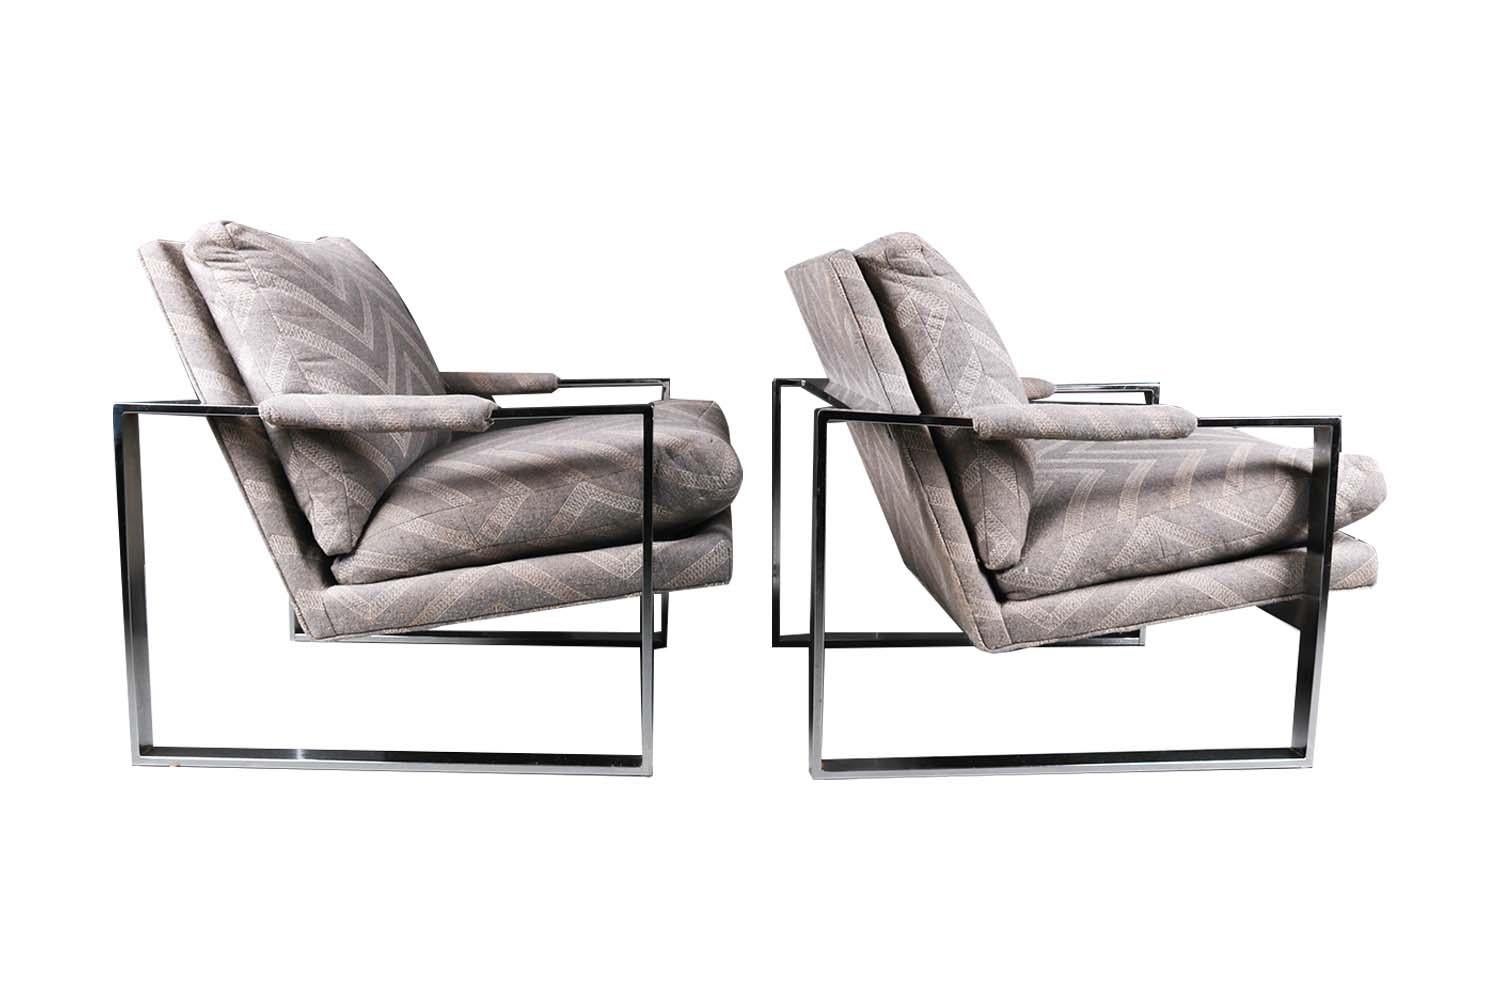 Midcentury Chrome Lounge Chairs Milo Baughman Style Pair In Good Condition For Sale In Baltimore, MD